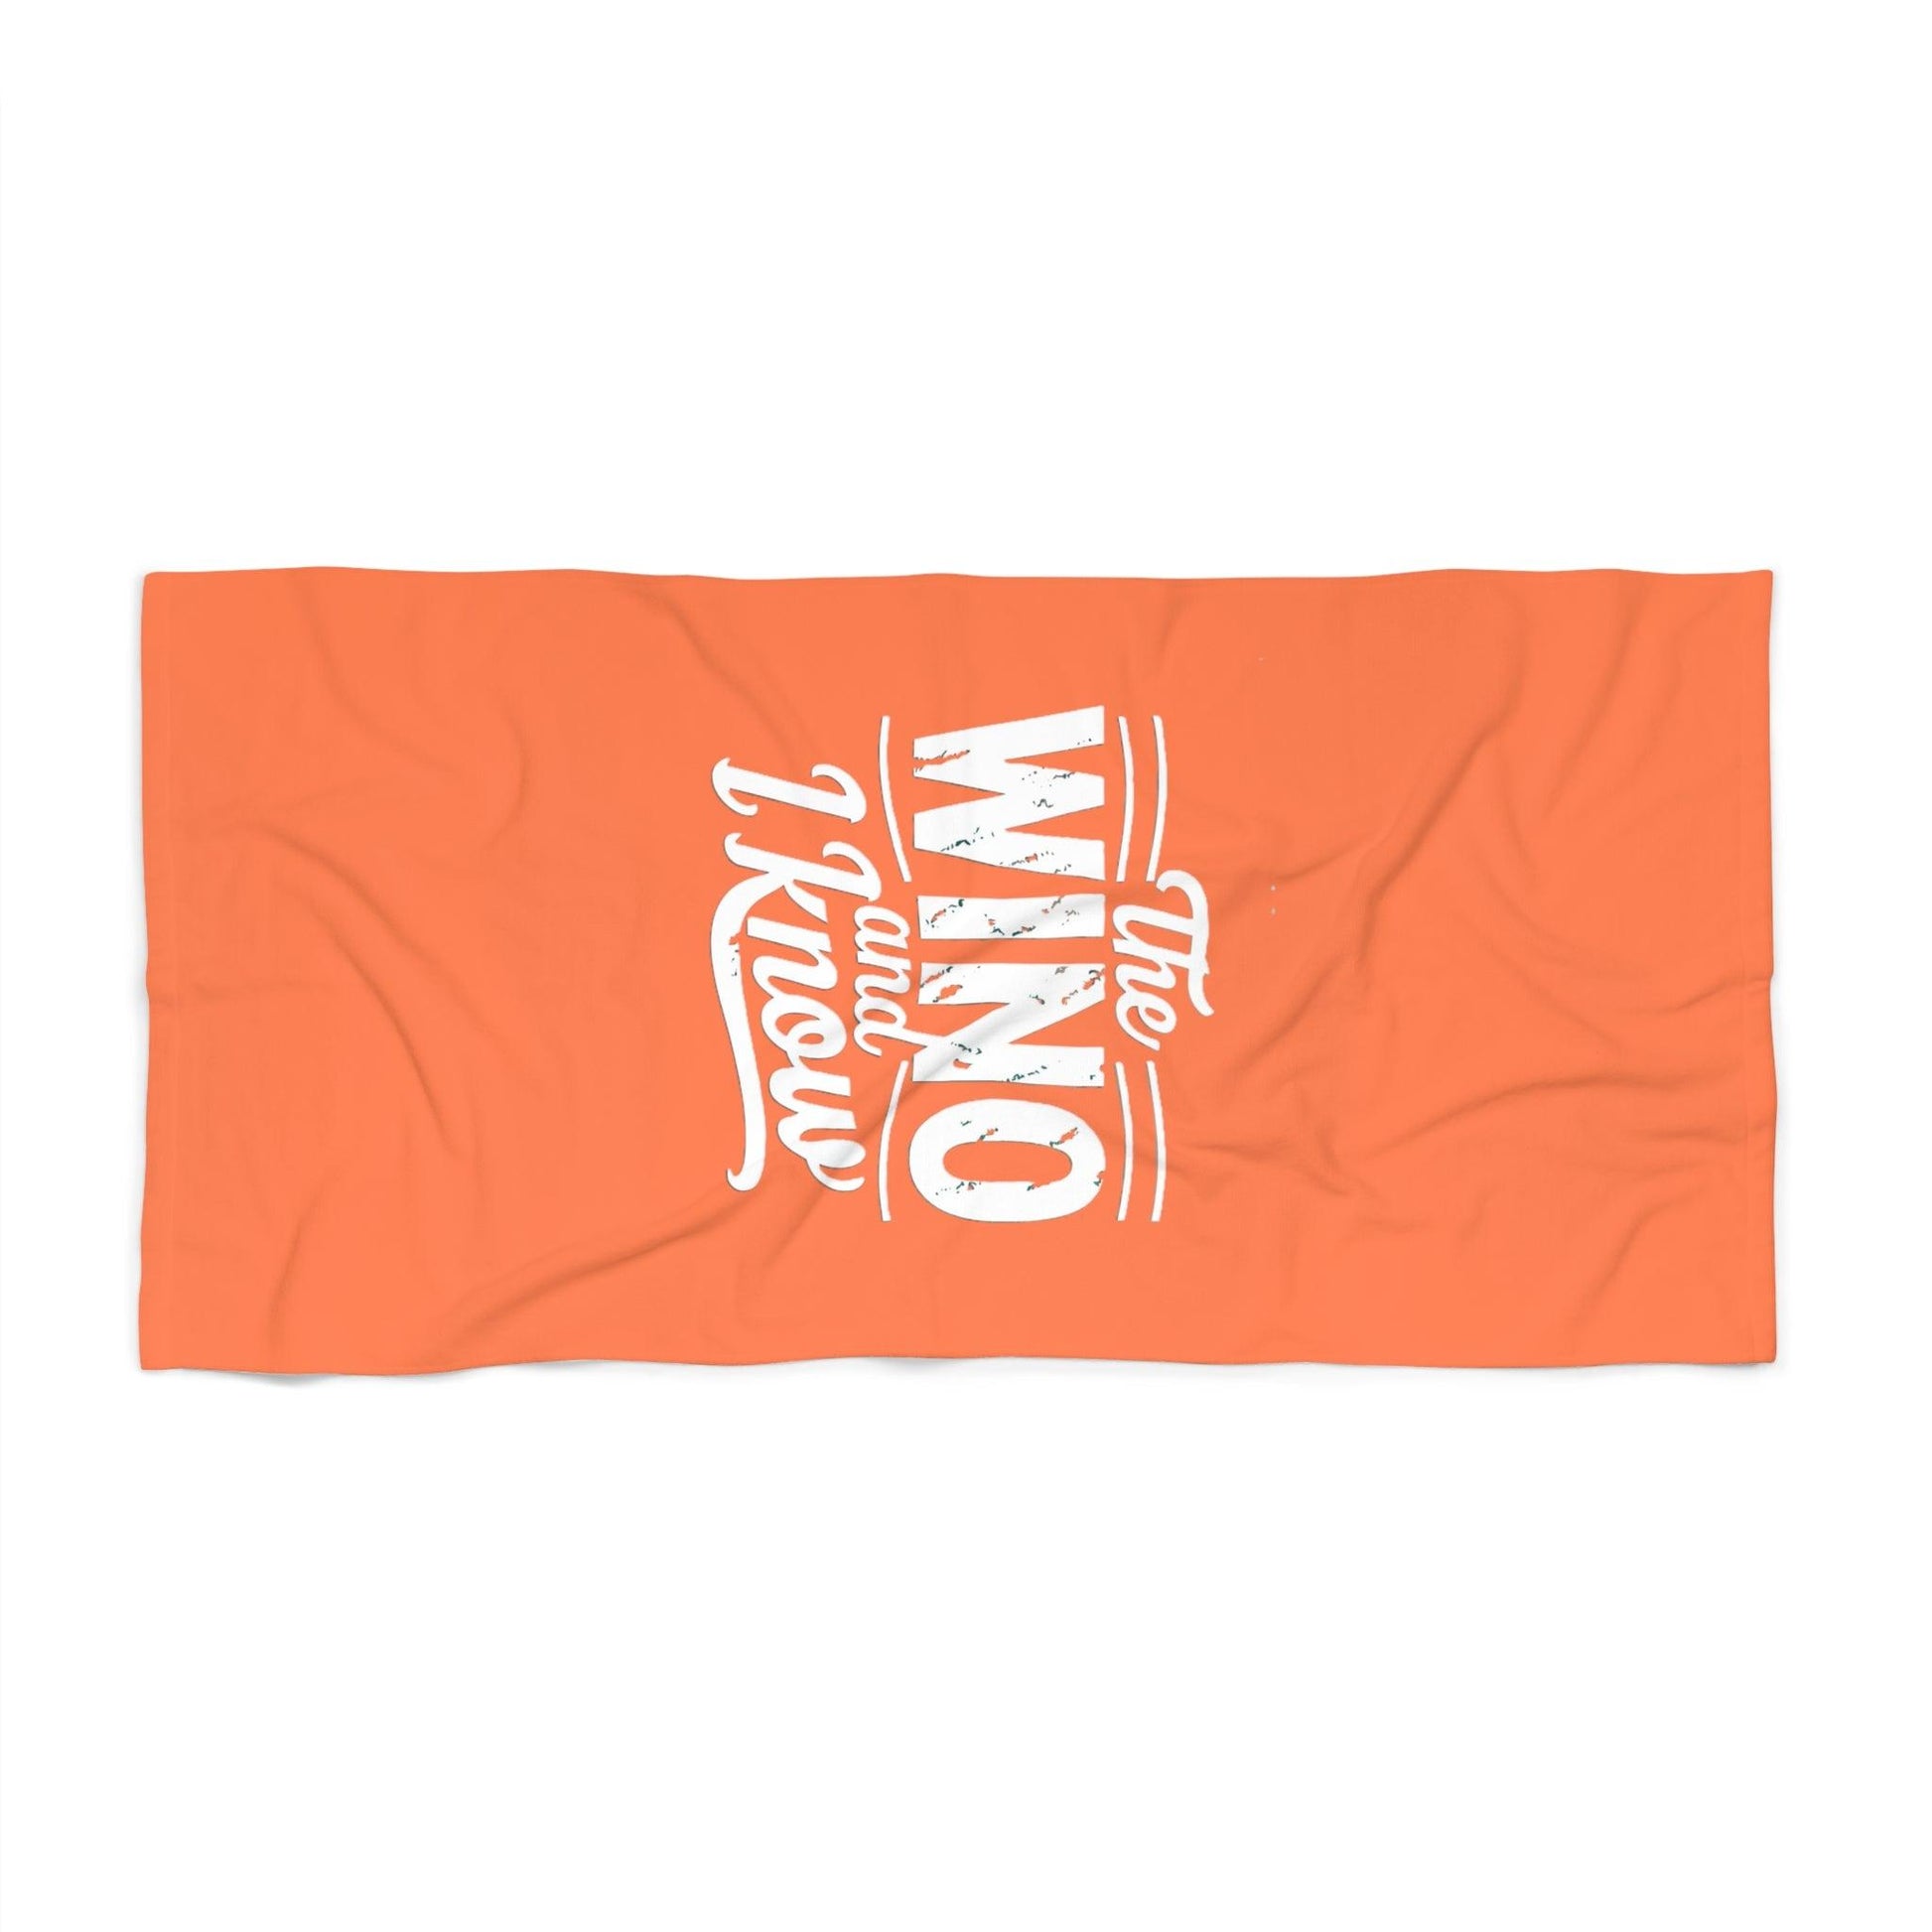 The Wino and I Know Beach Towel - Coastal Collections